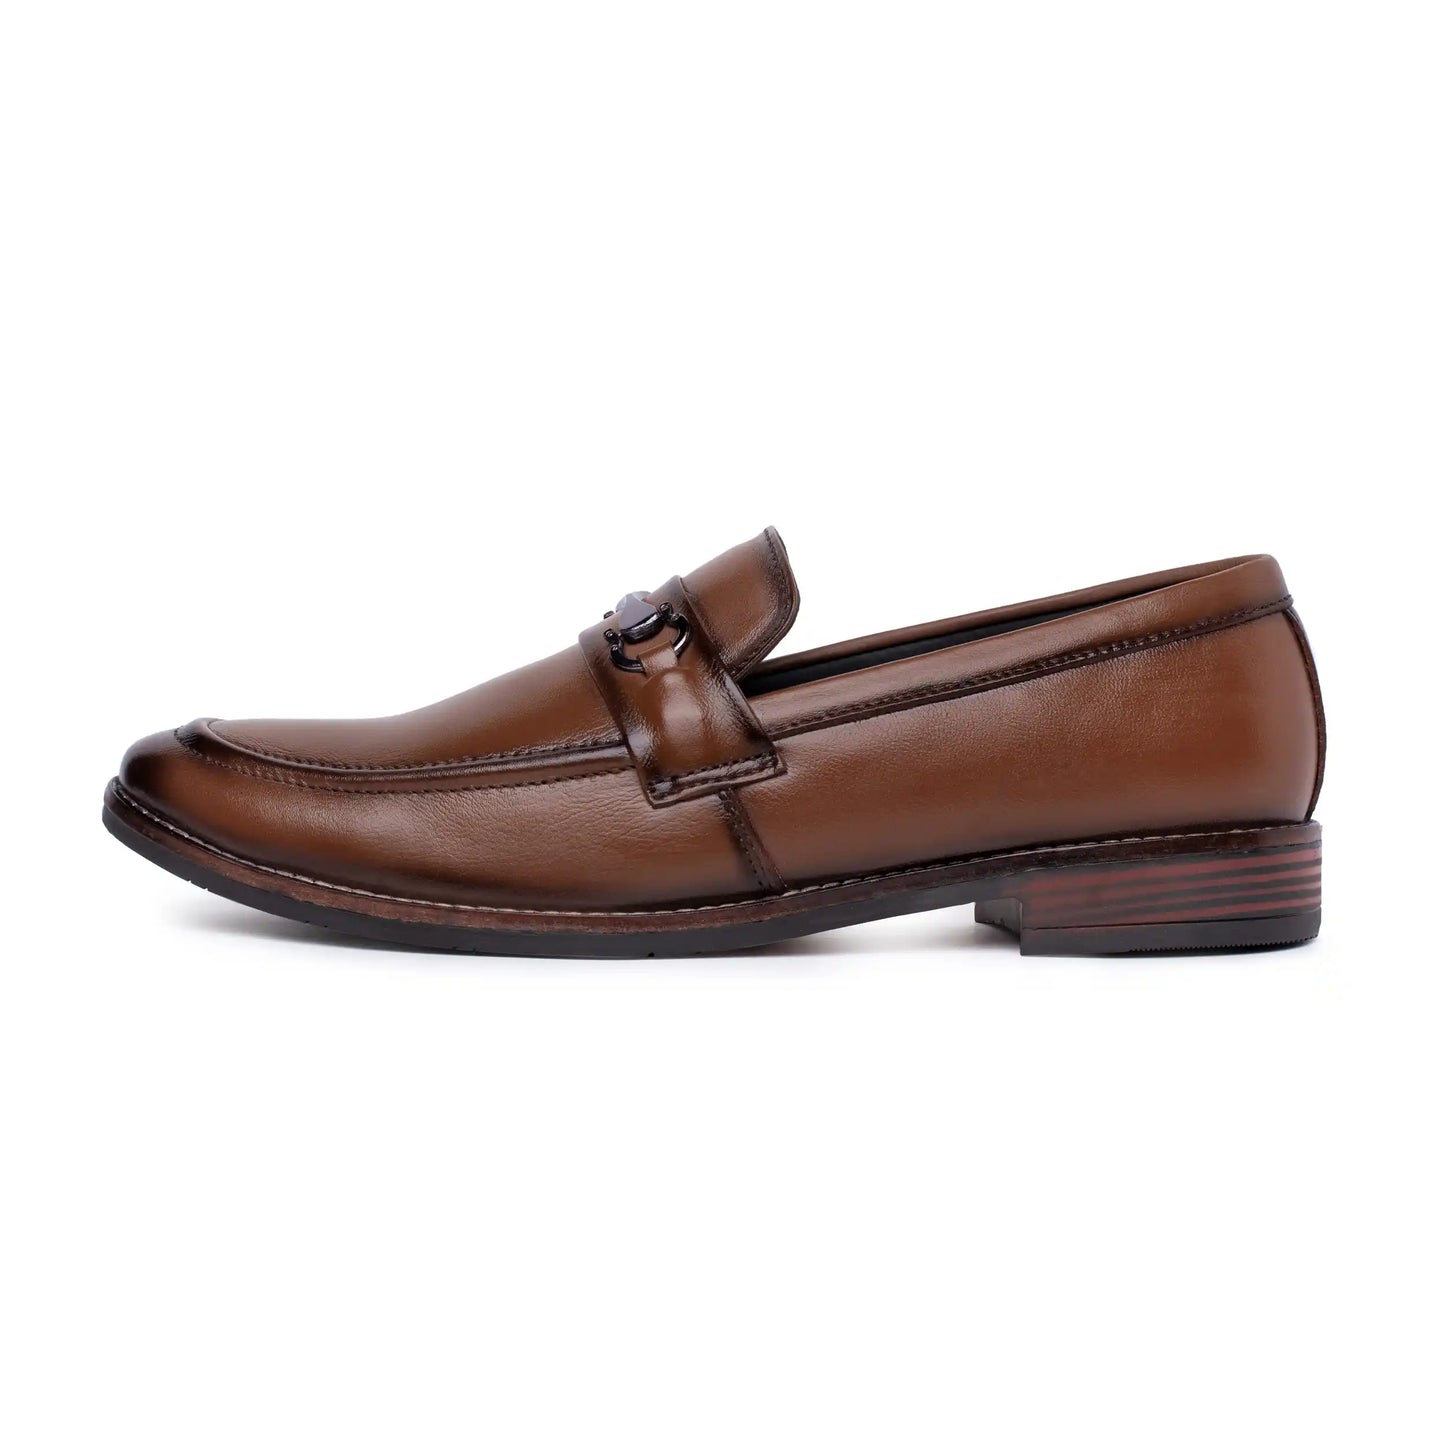 Bit Loafers Men Pure Leather Casual Slip On